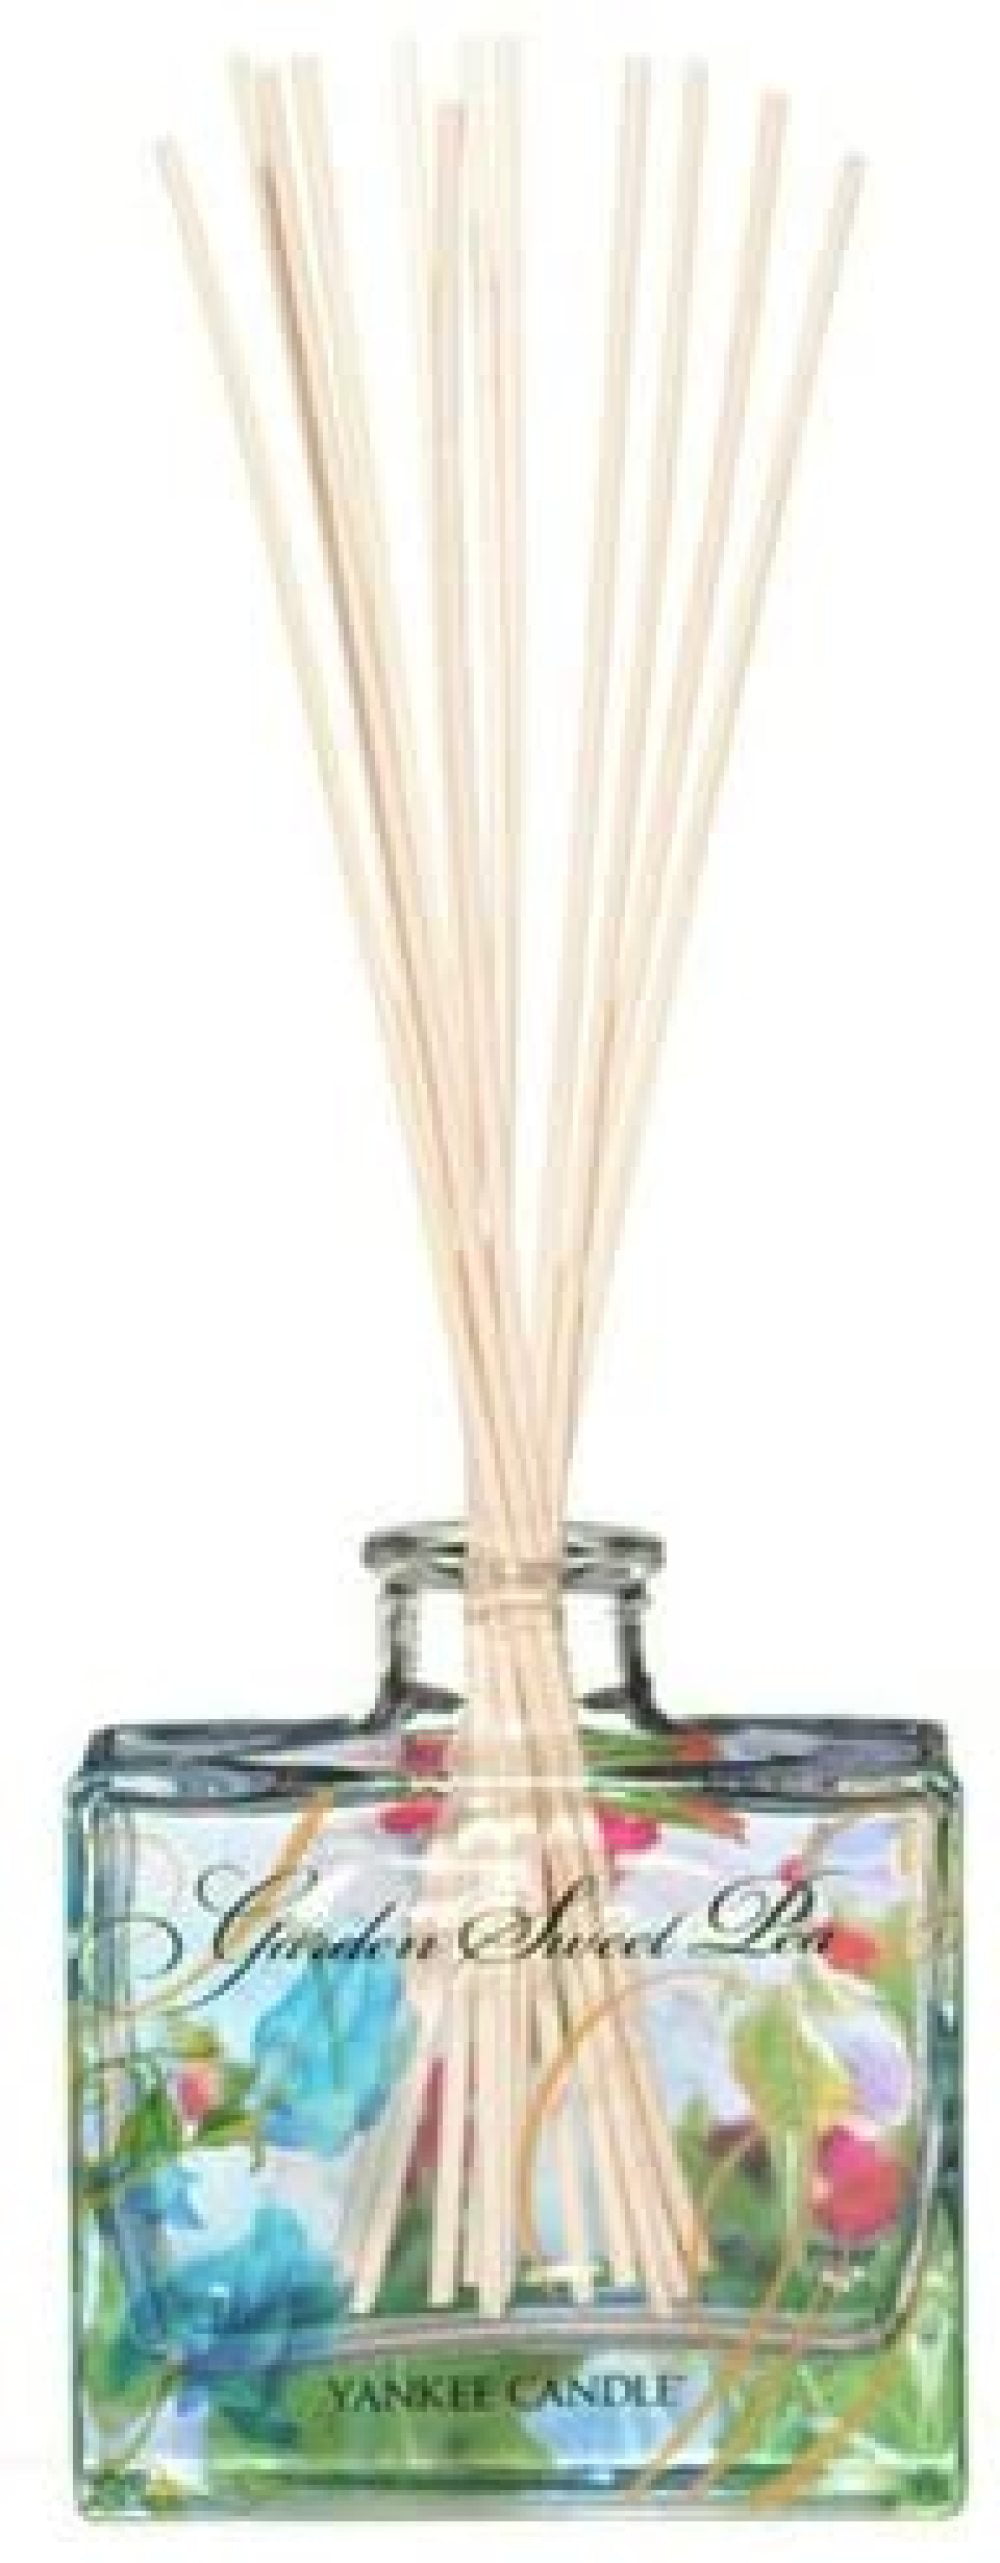 EMPTY Decorated YANKEE CANDLE Reed Diffuser GLASS BOTTLE No Caps No Reeds 